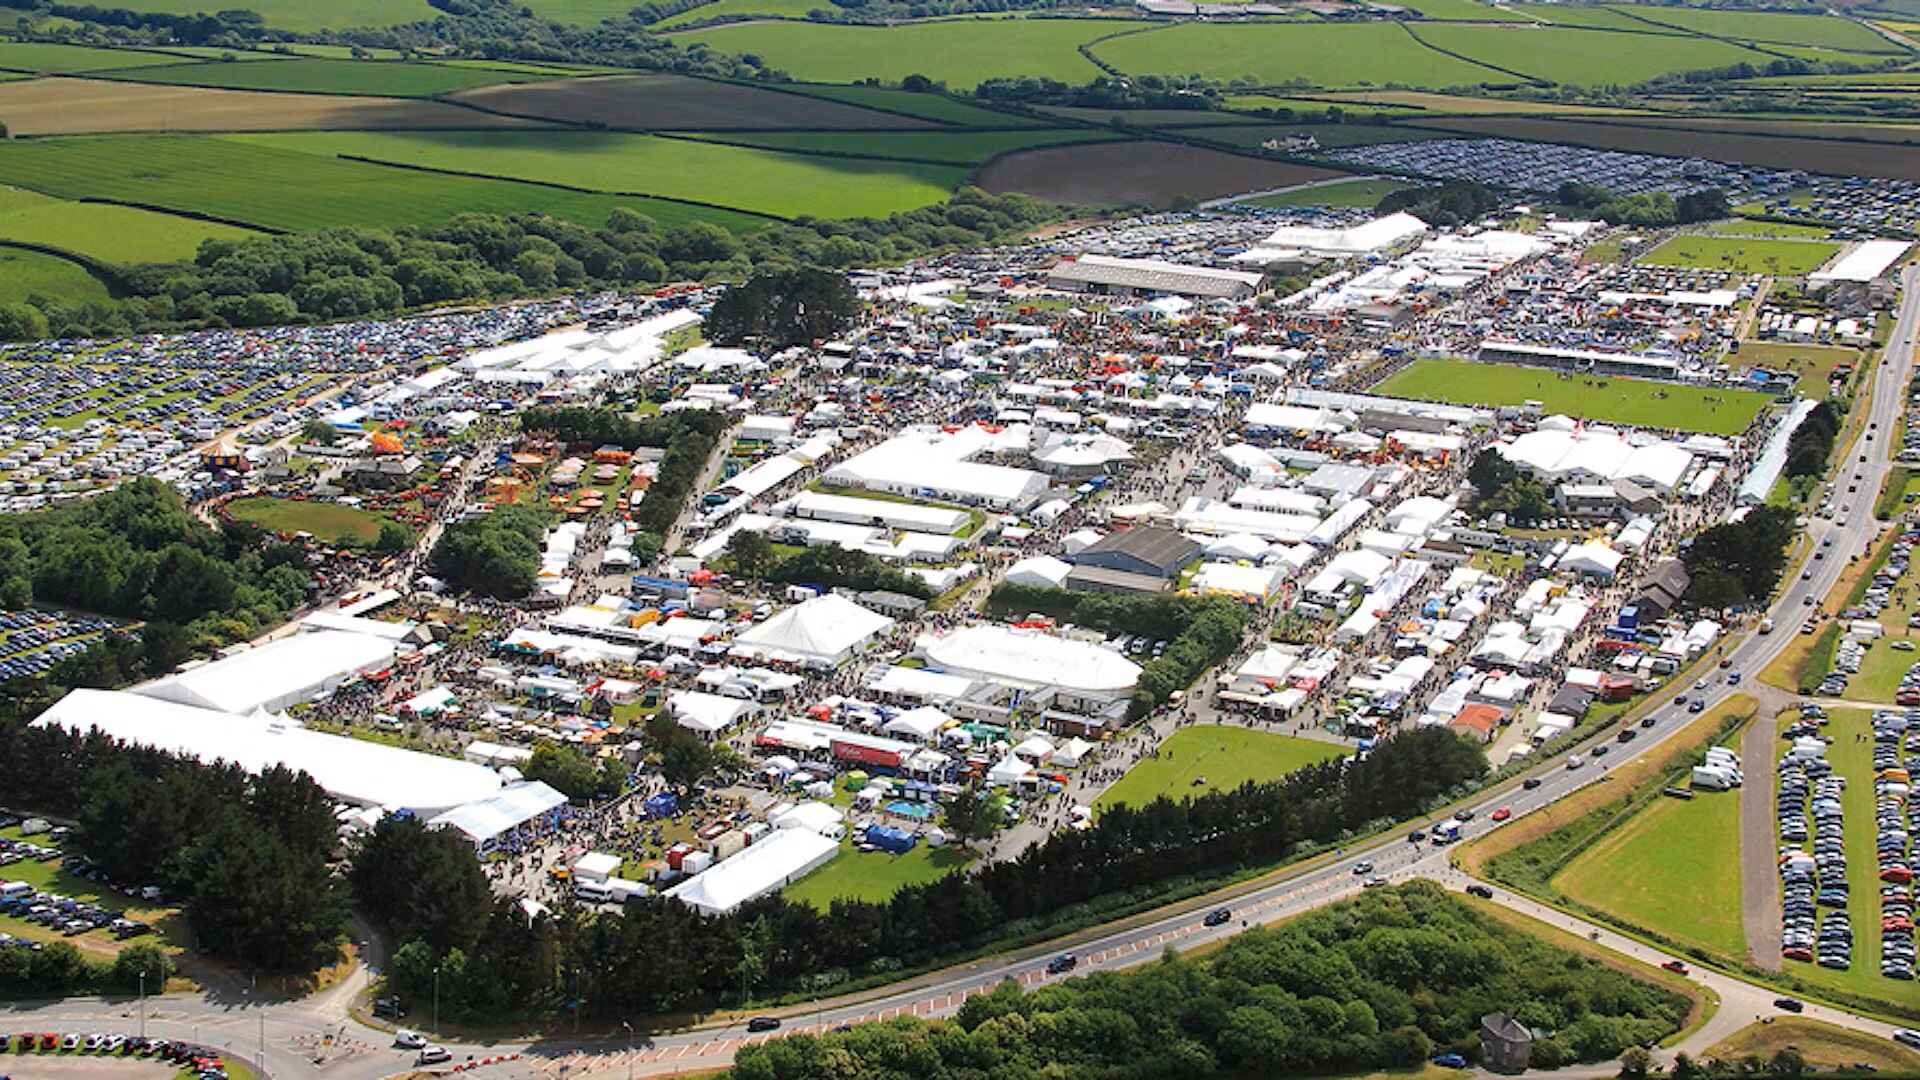 8-facts-about-royal-cornwall-show